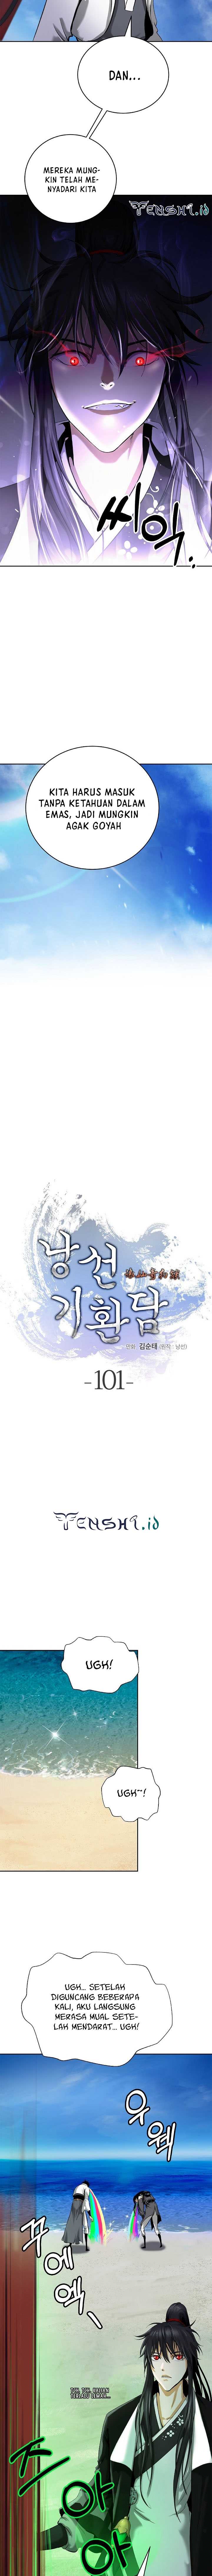 Cystic Story (Call The Spear) Chapter 101